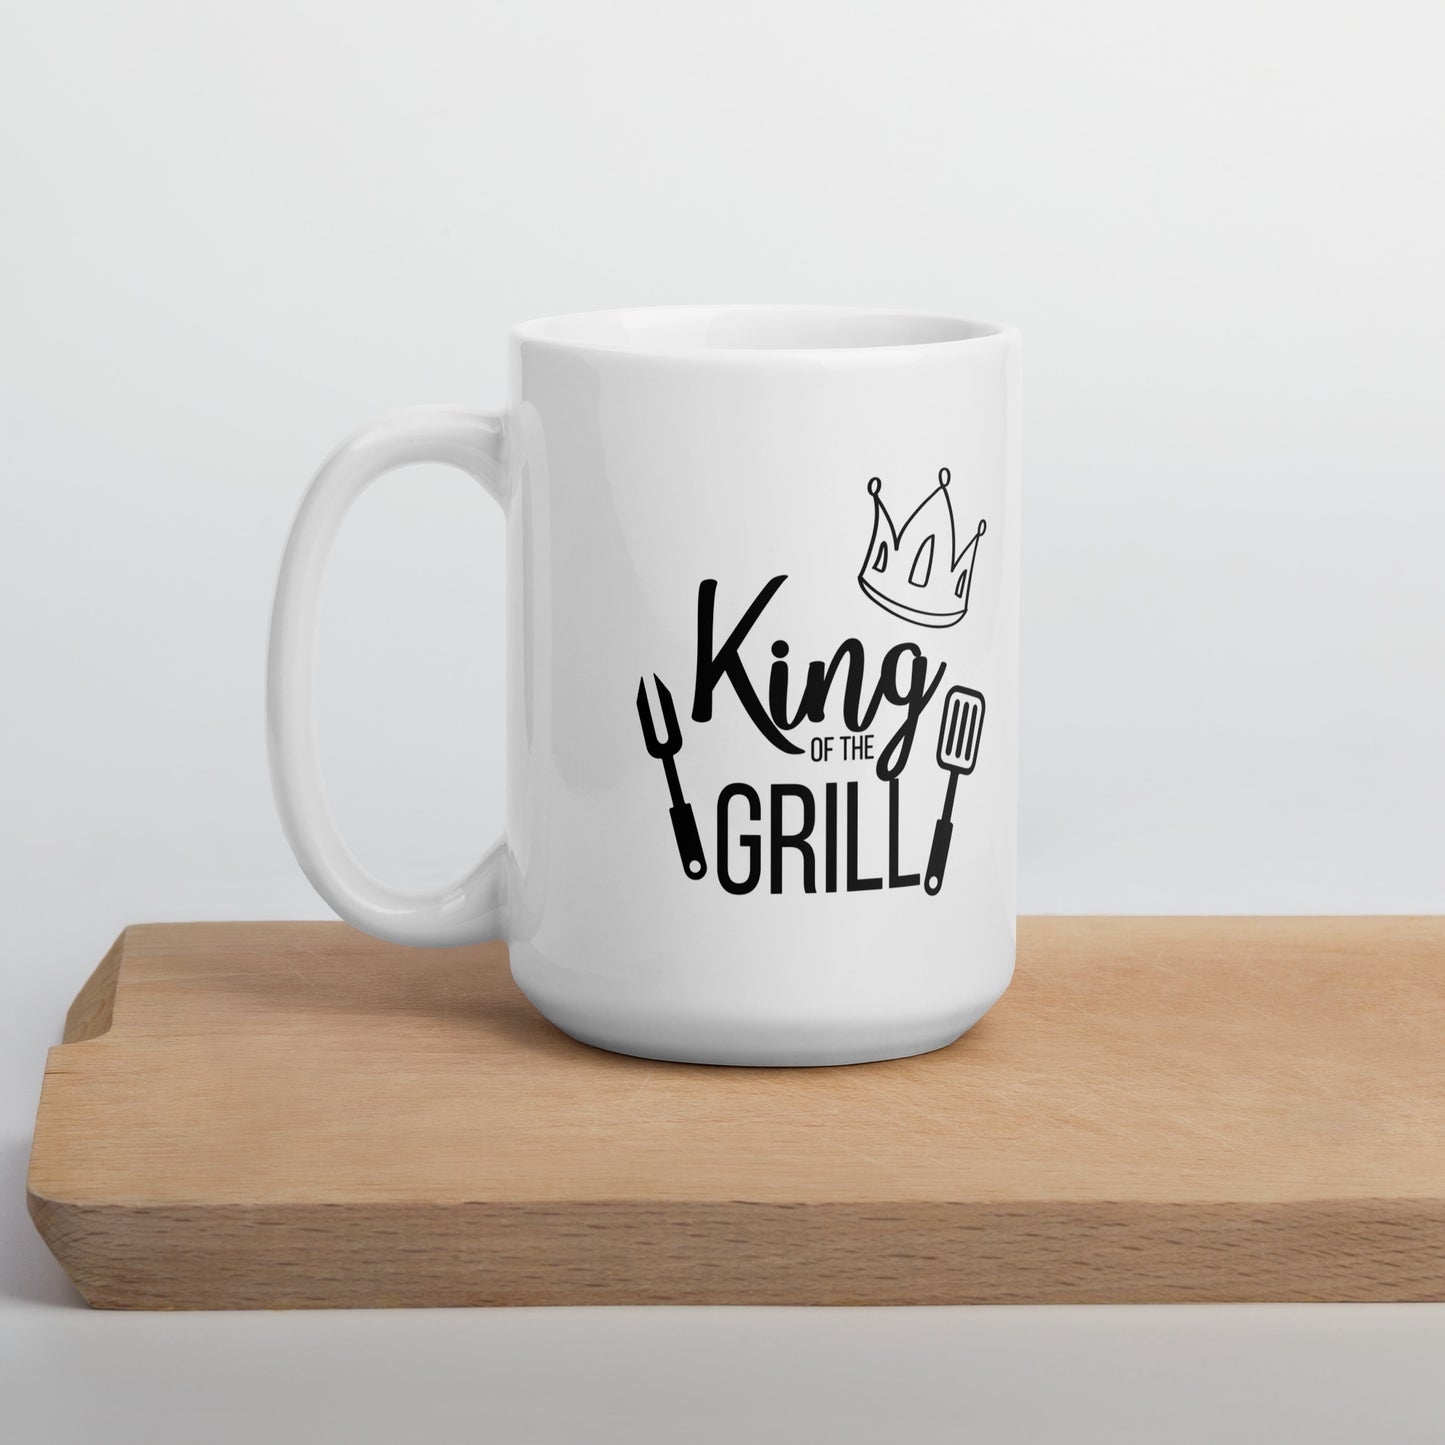 King of the Grill Taza